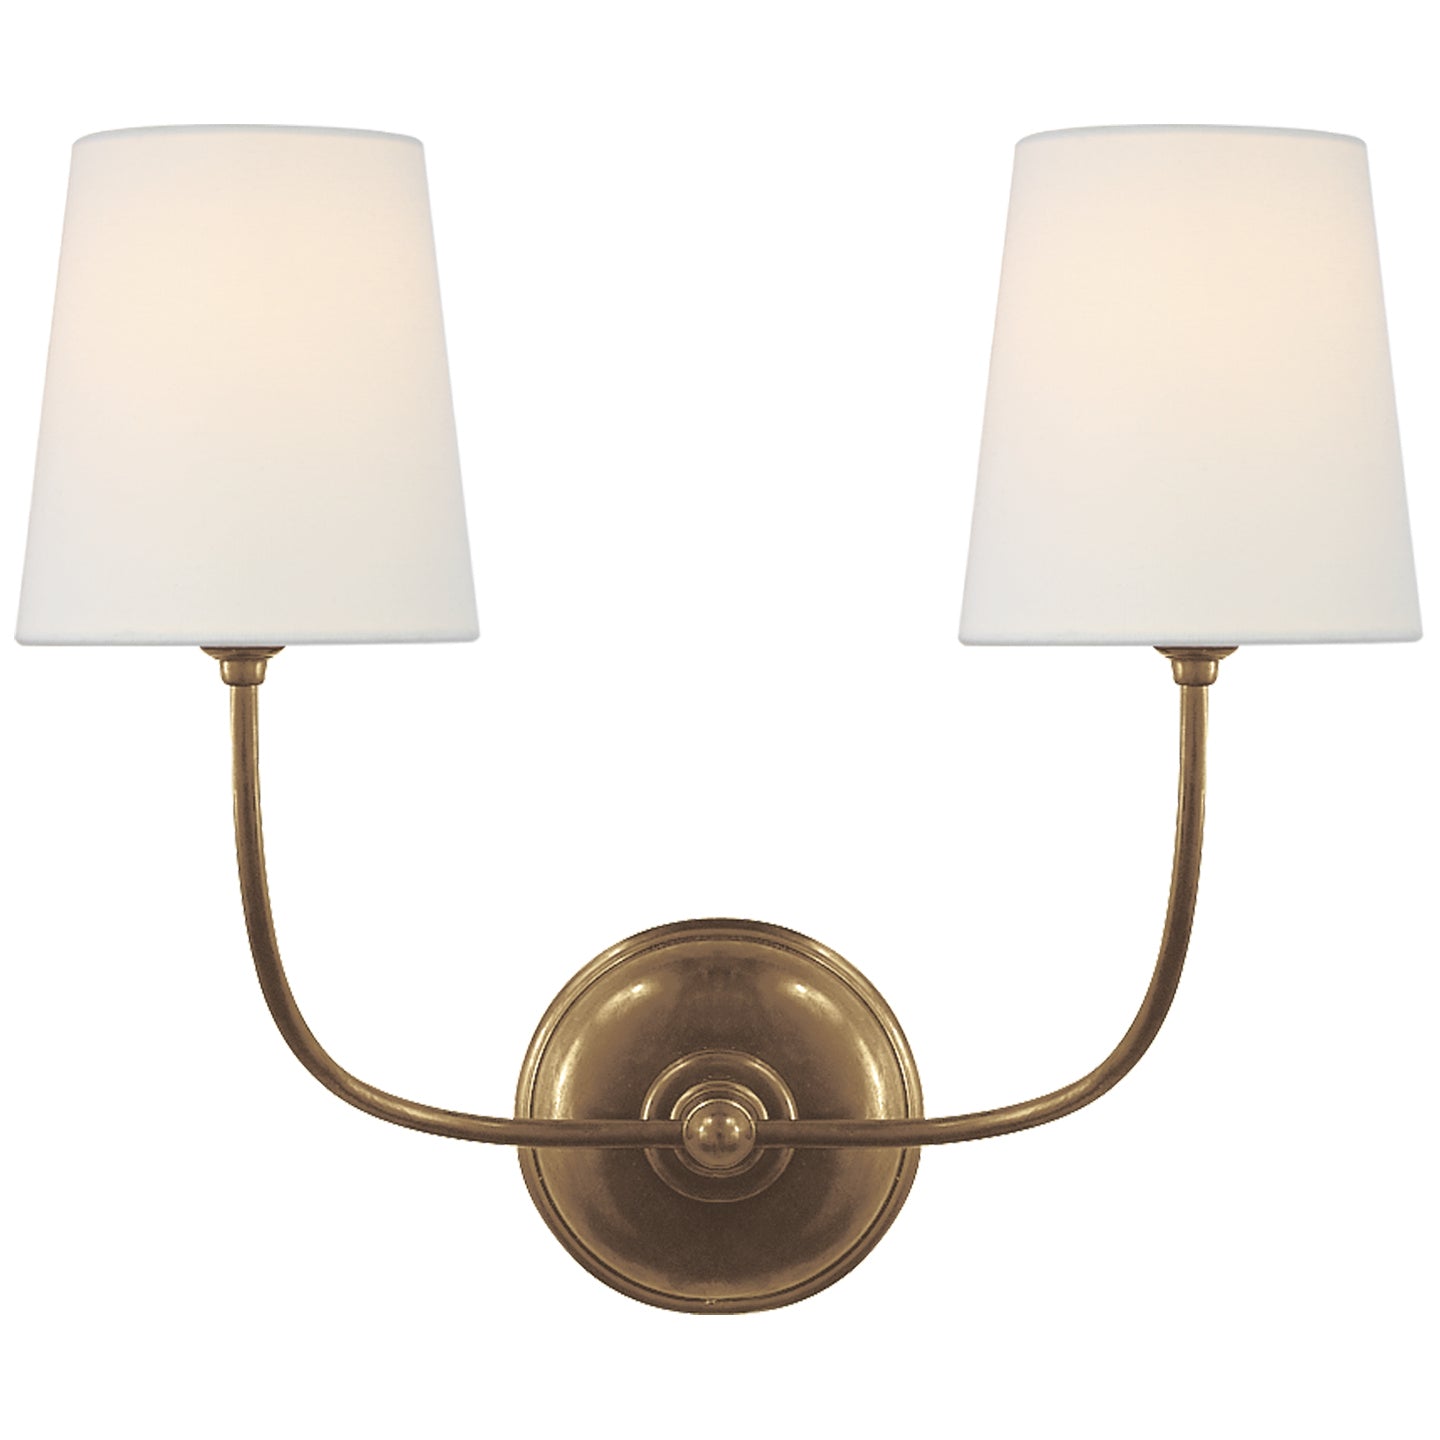 Visual Comfort Signature Canada - Two Light Wall Sconce - Vendome - Hand-Rubbed Antique Brass- Union Lighting Luminaires Decor